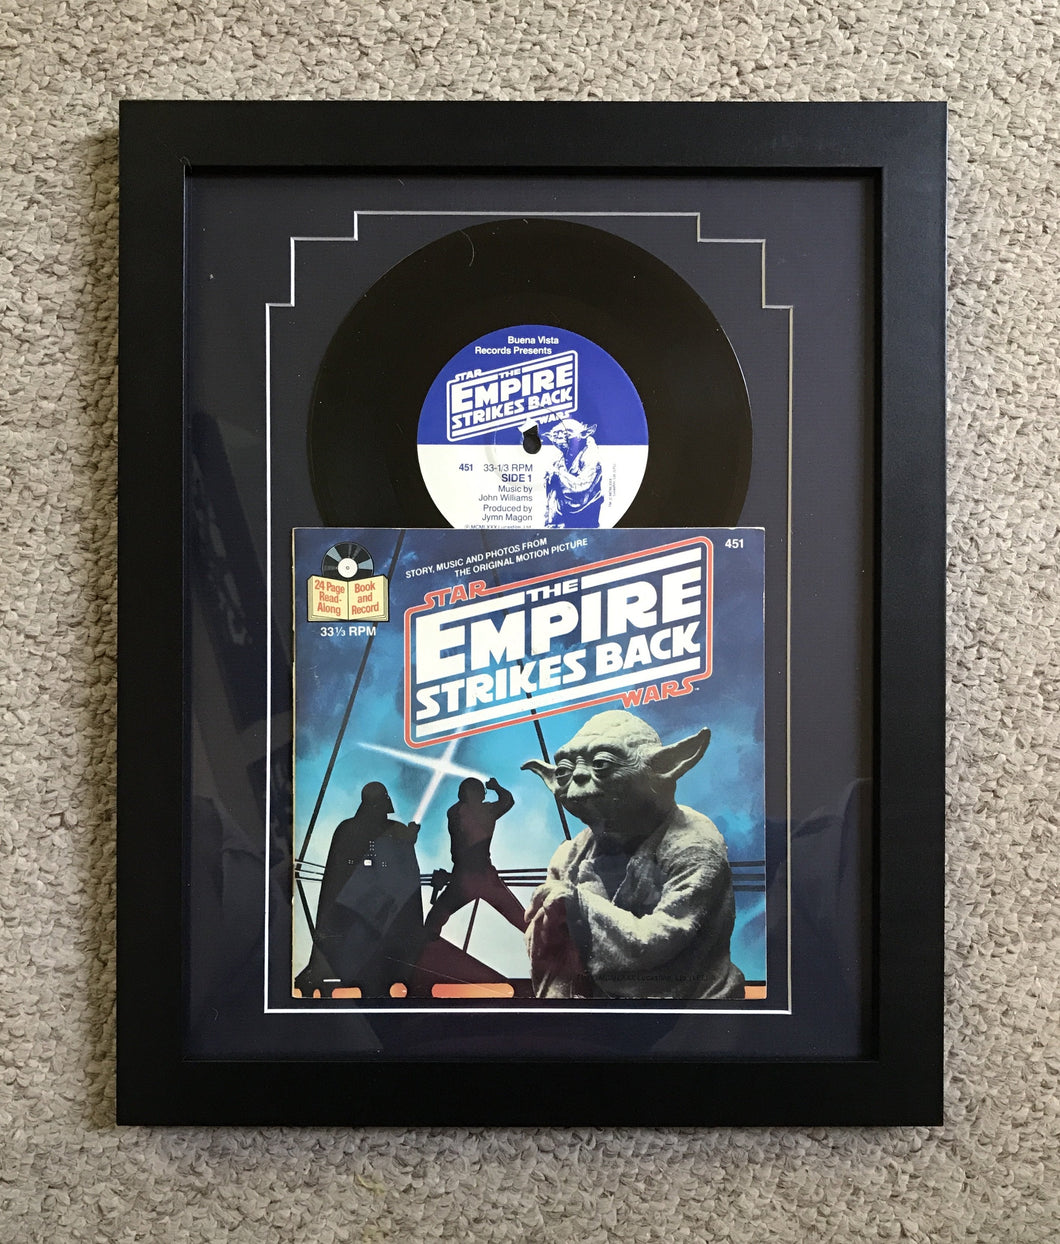 “Empire strikes back” 1979 framed record and book